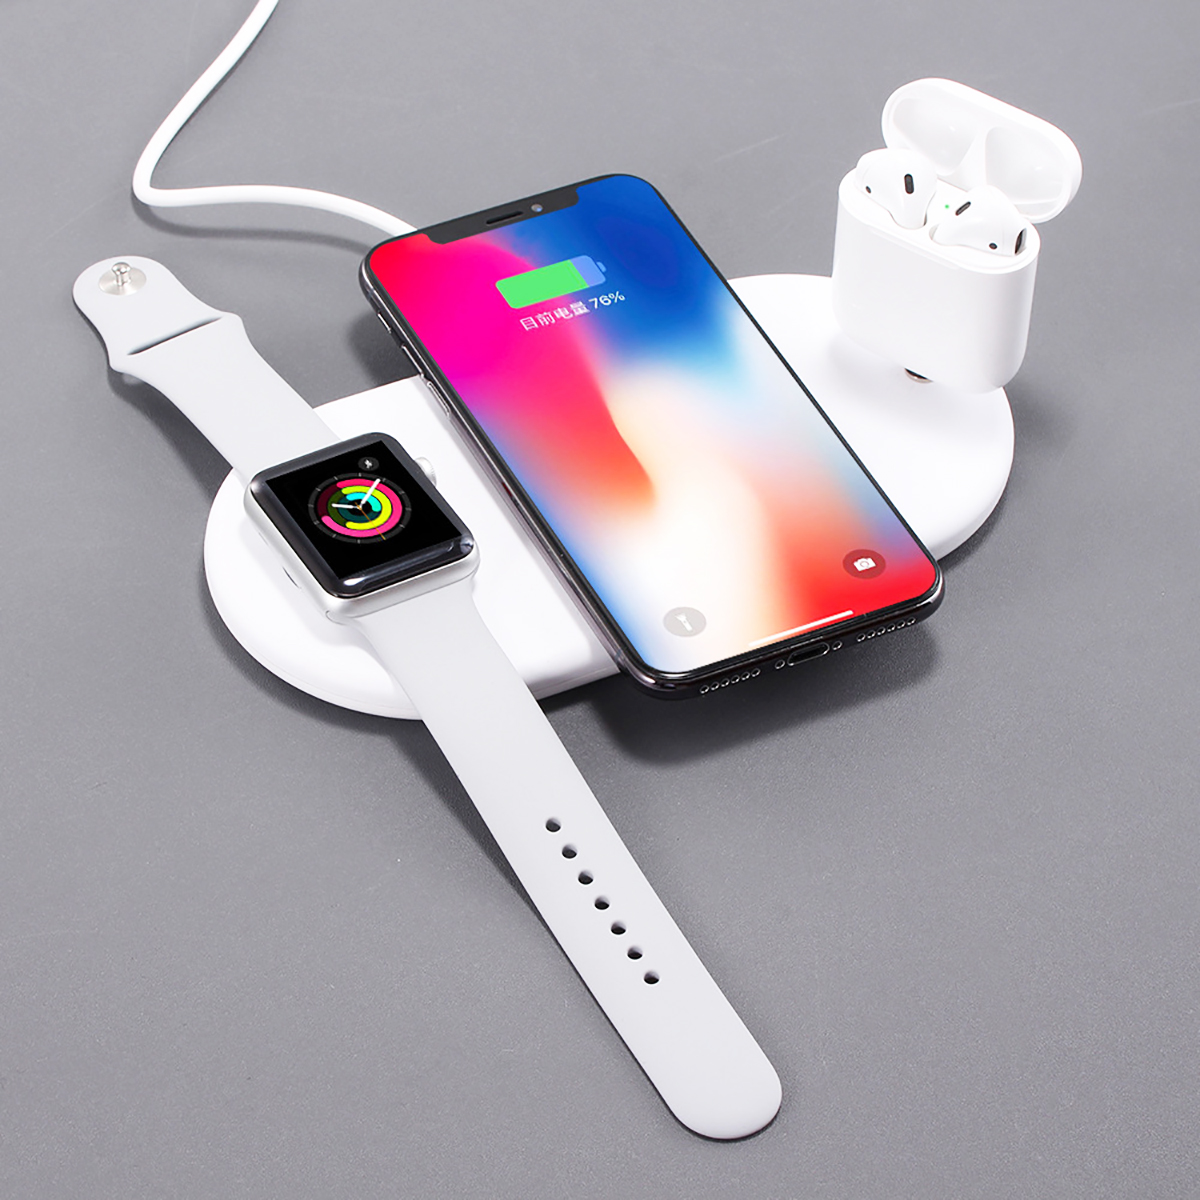 3-In-1-Qi-Wireless-Fast-Charger-USB-Stand-Power-Pad-for-iPhoneX-8-iwatch-Airpods-1416976